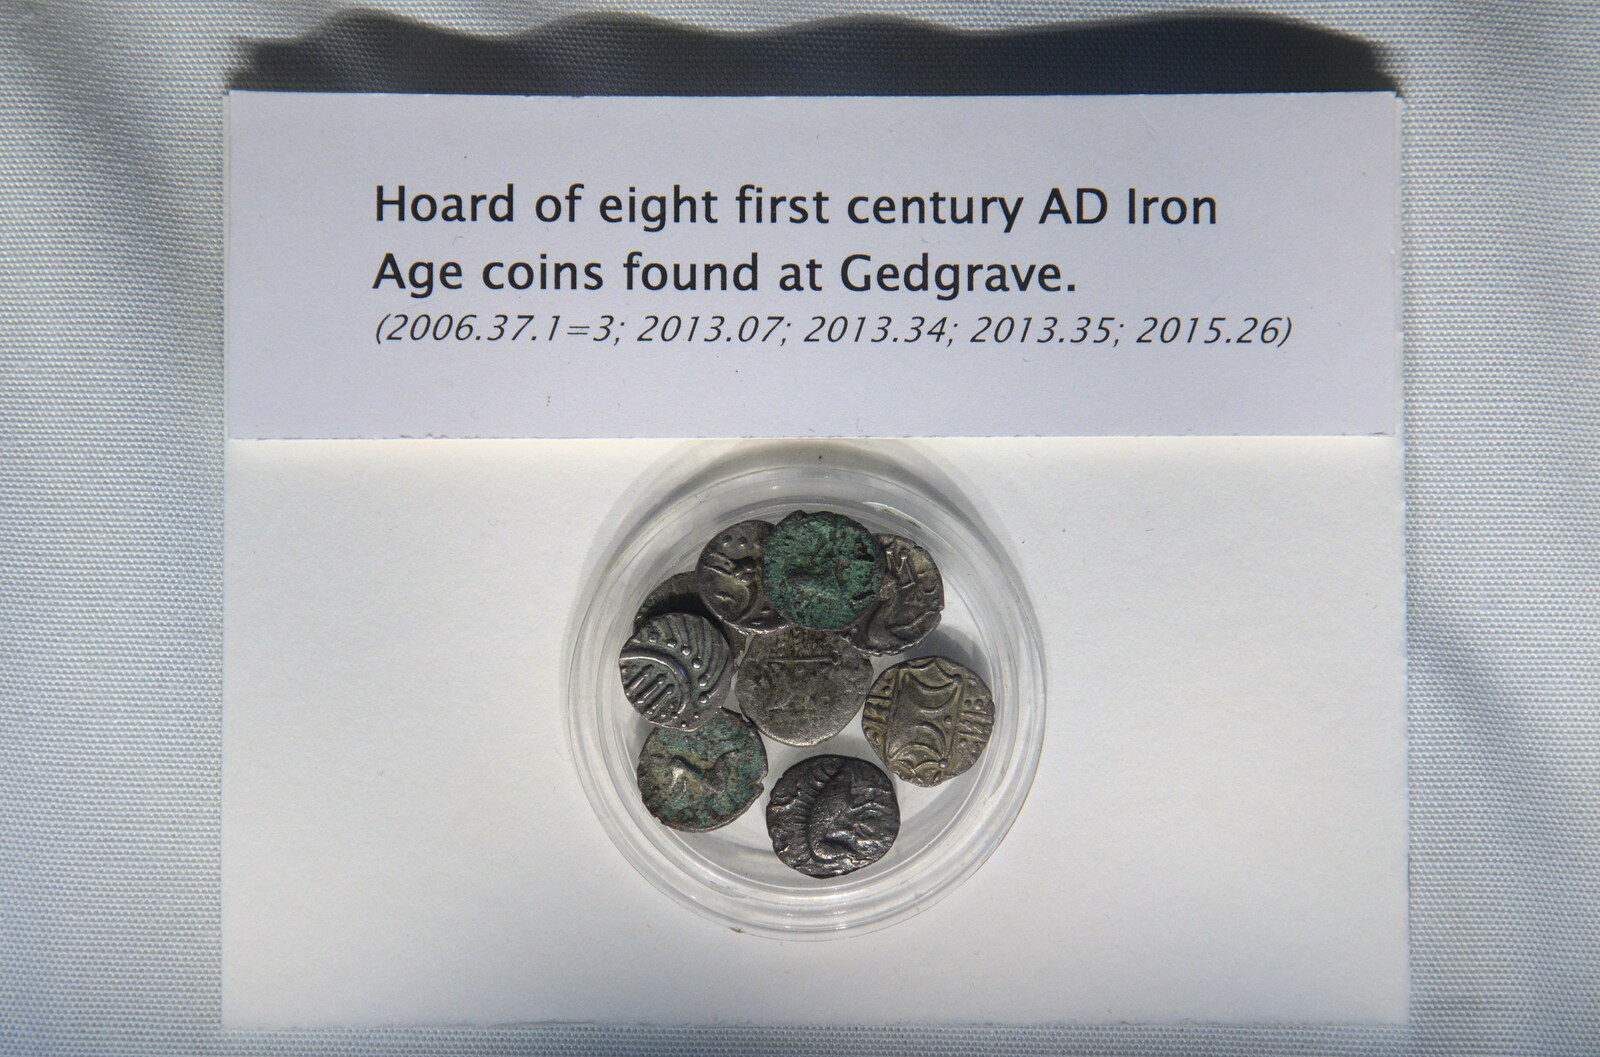 Some local Roman coins in the museum from A Trip to Orford Castle, Orford, Suffolk - 26th February 2022